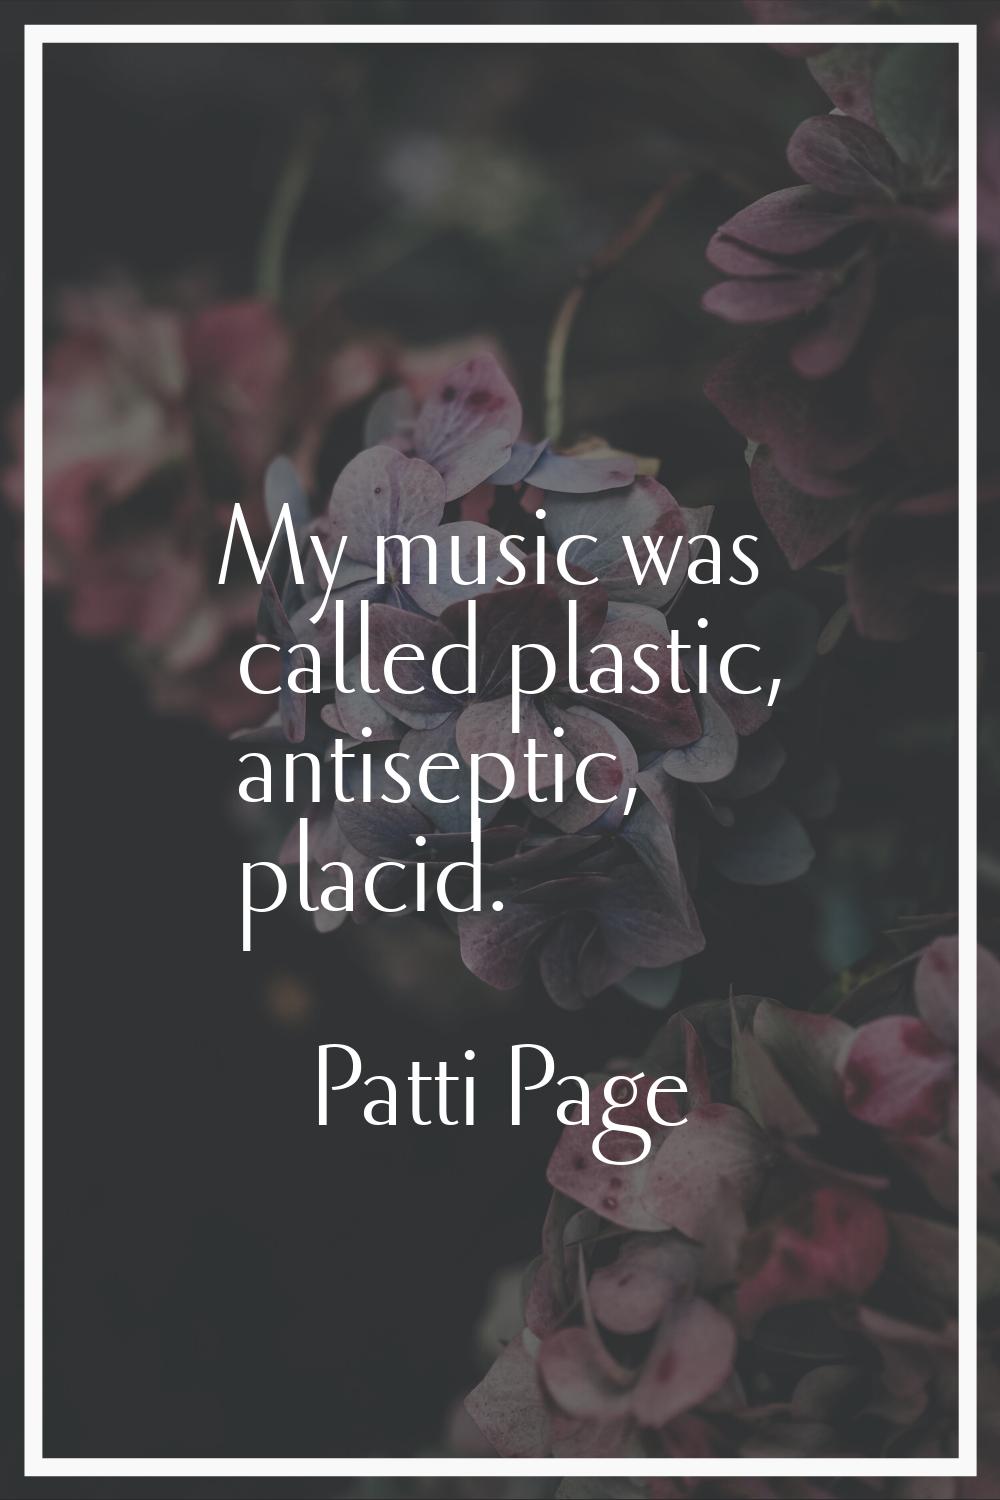 My music was called plastic, antiseptic, placid.